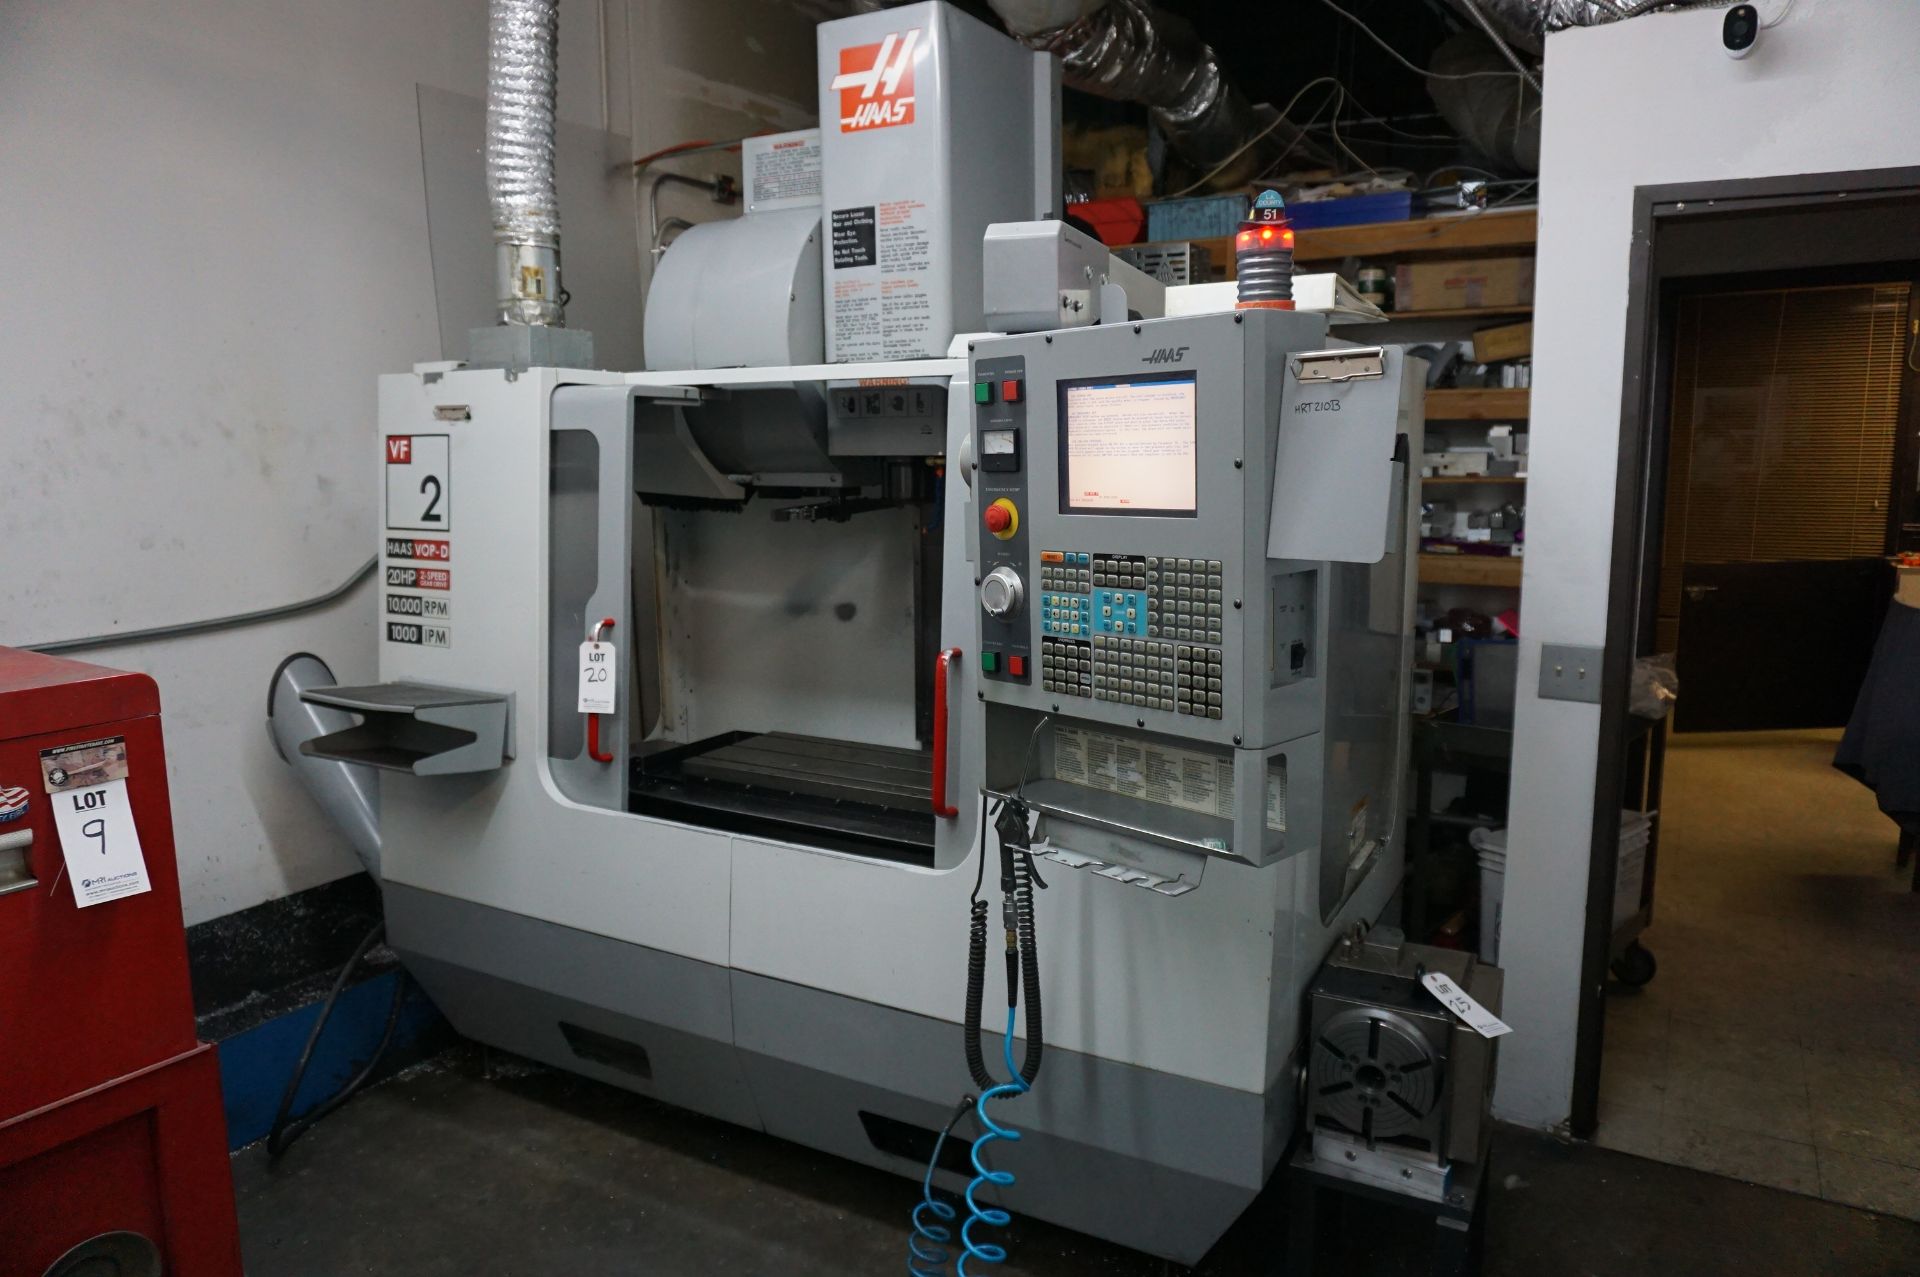 2005 HAAS VF2 VERTICAL CNC MILL, S/N 39719, 30” X 16” X 20”, WIRED FOR 4 TH AXIS, 10,000 RPM